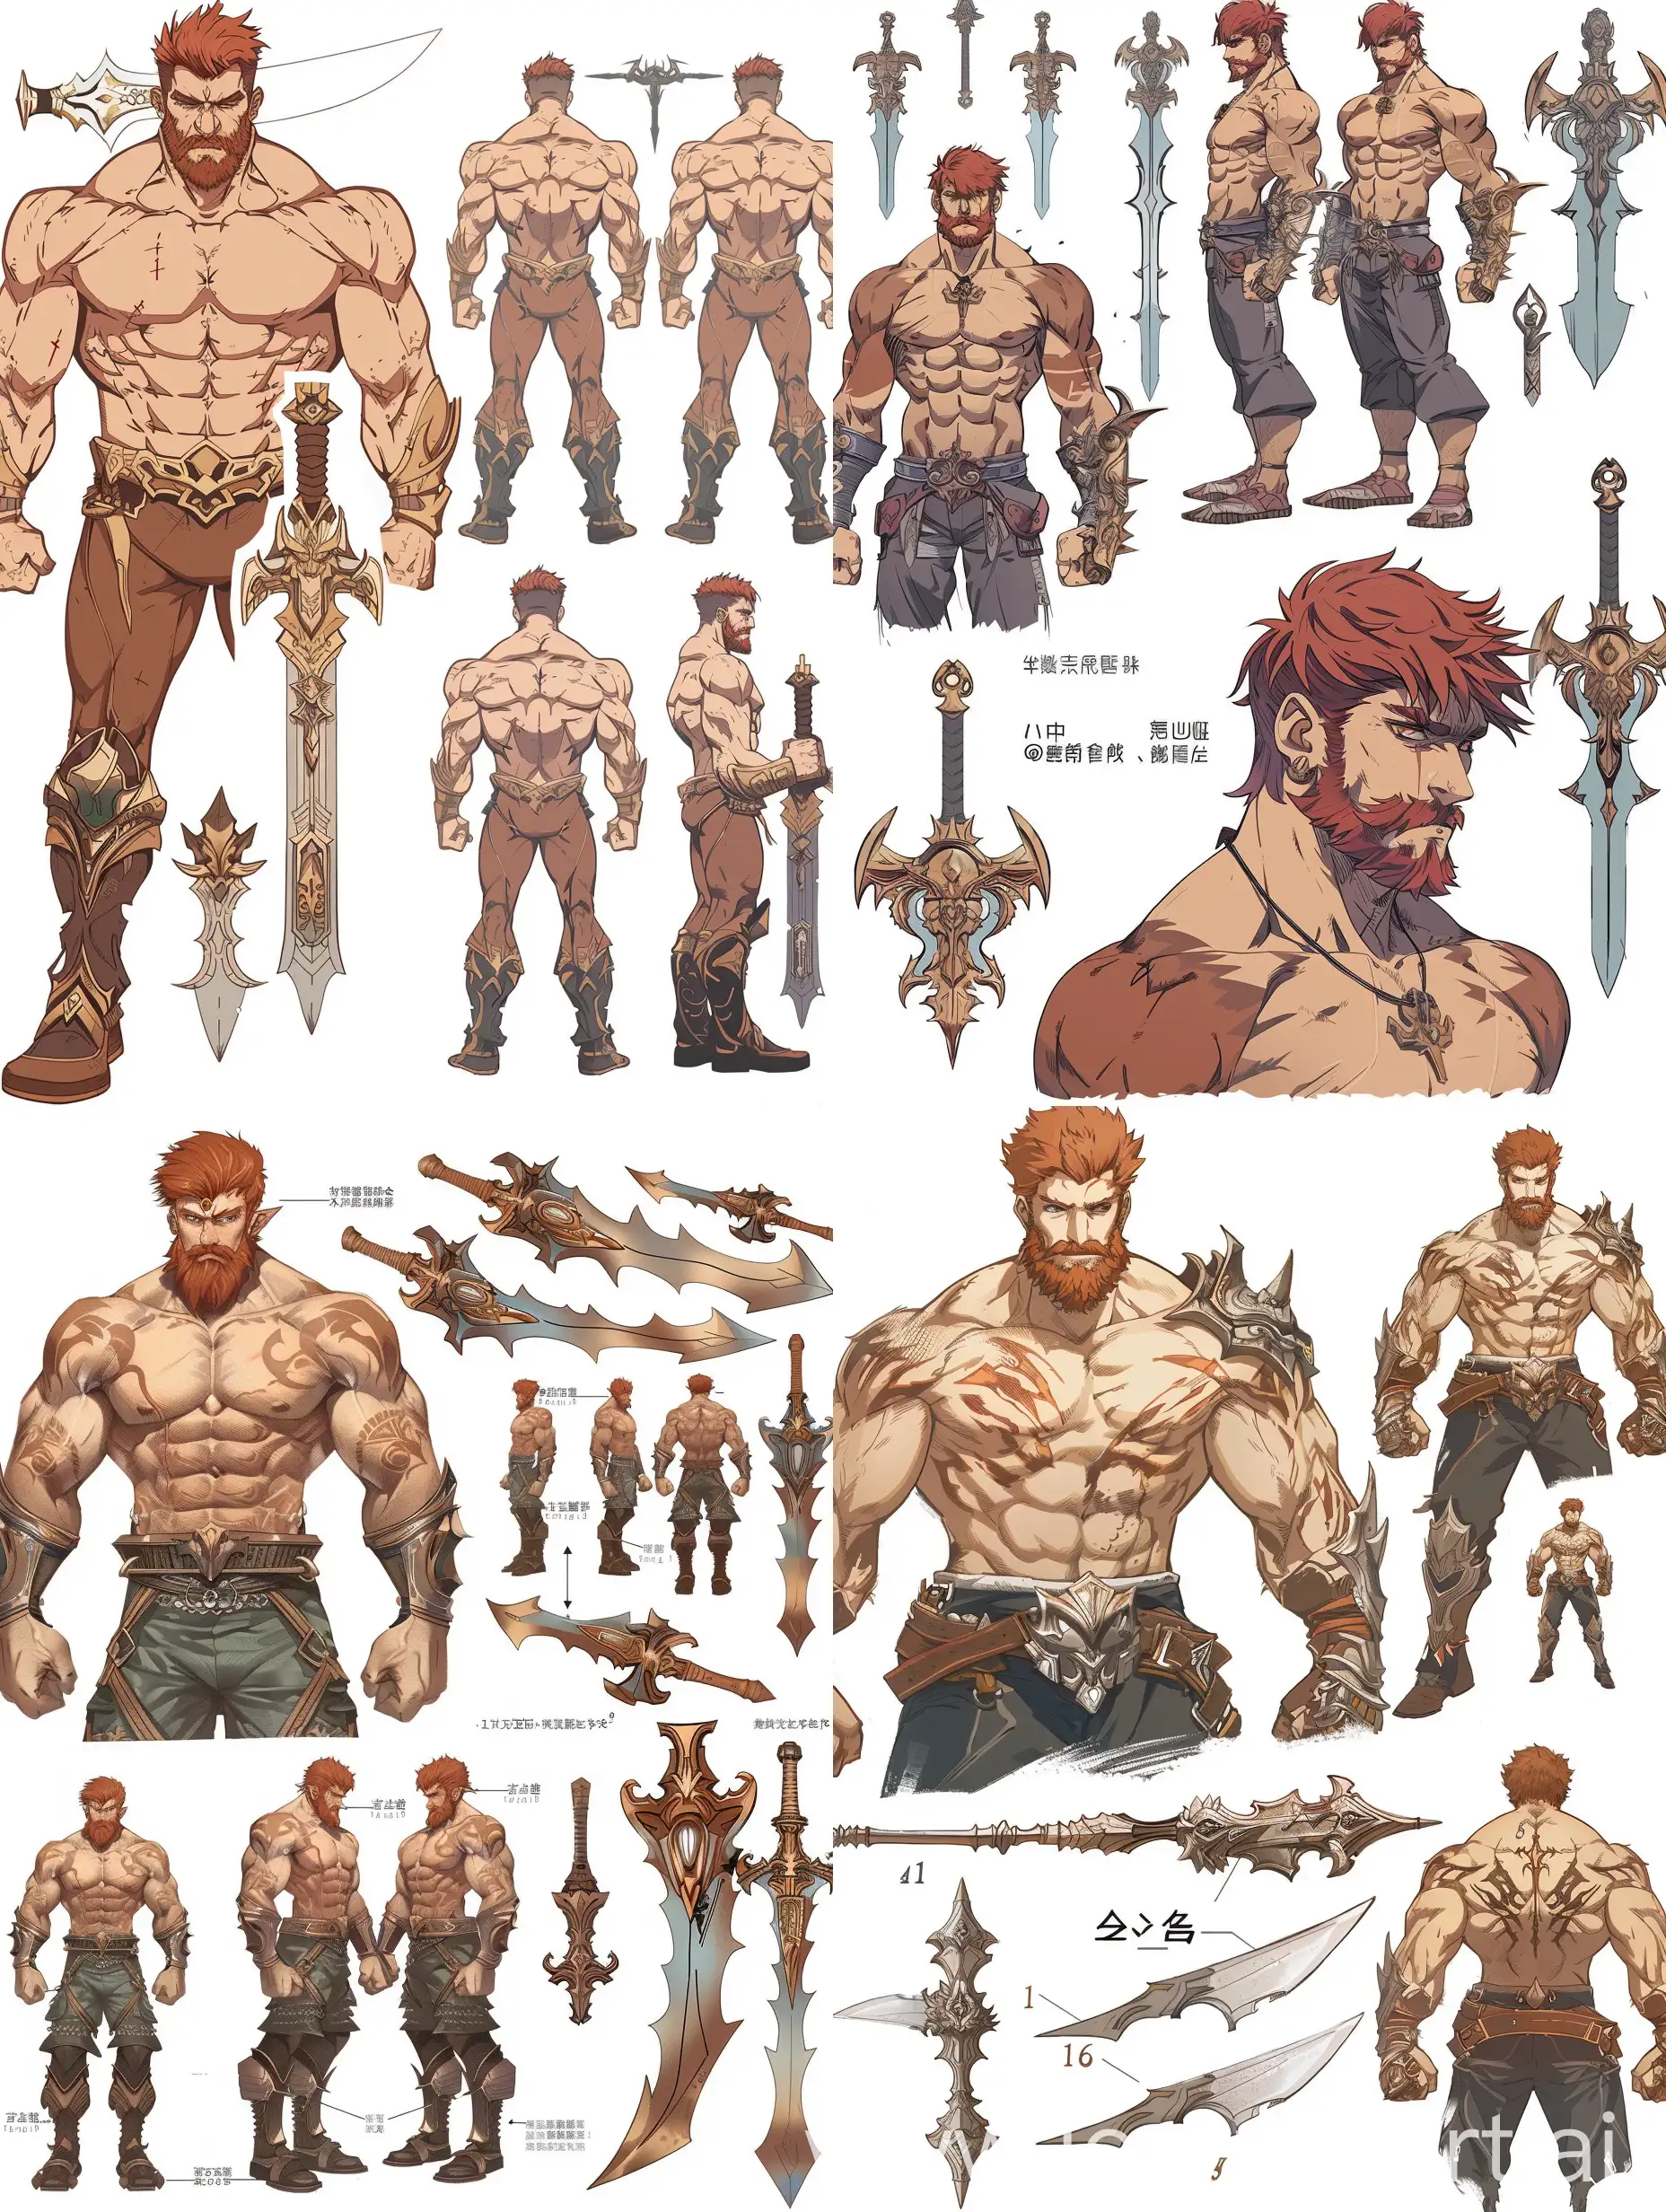 Anime style, character sheet for a muscular male fighter with red hair and beard, muscular chest, short hair, ornate greatsword, multiple angles